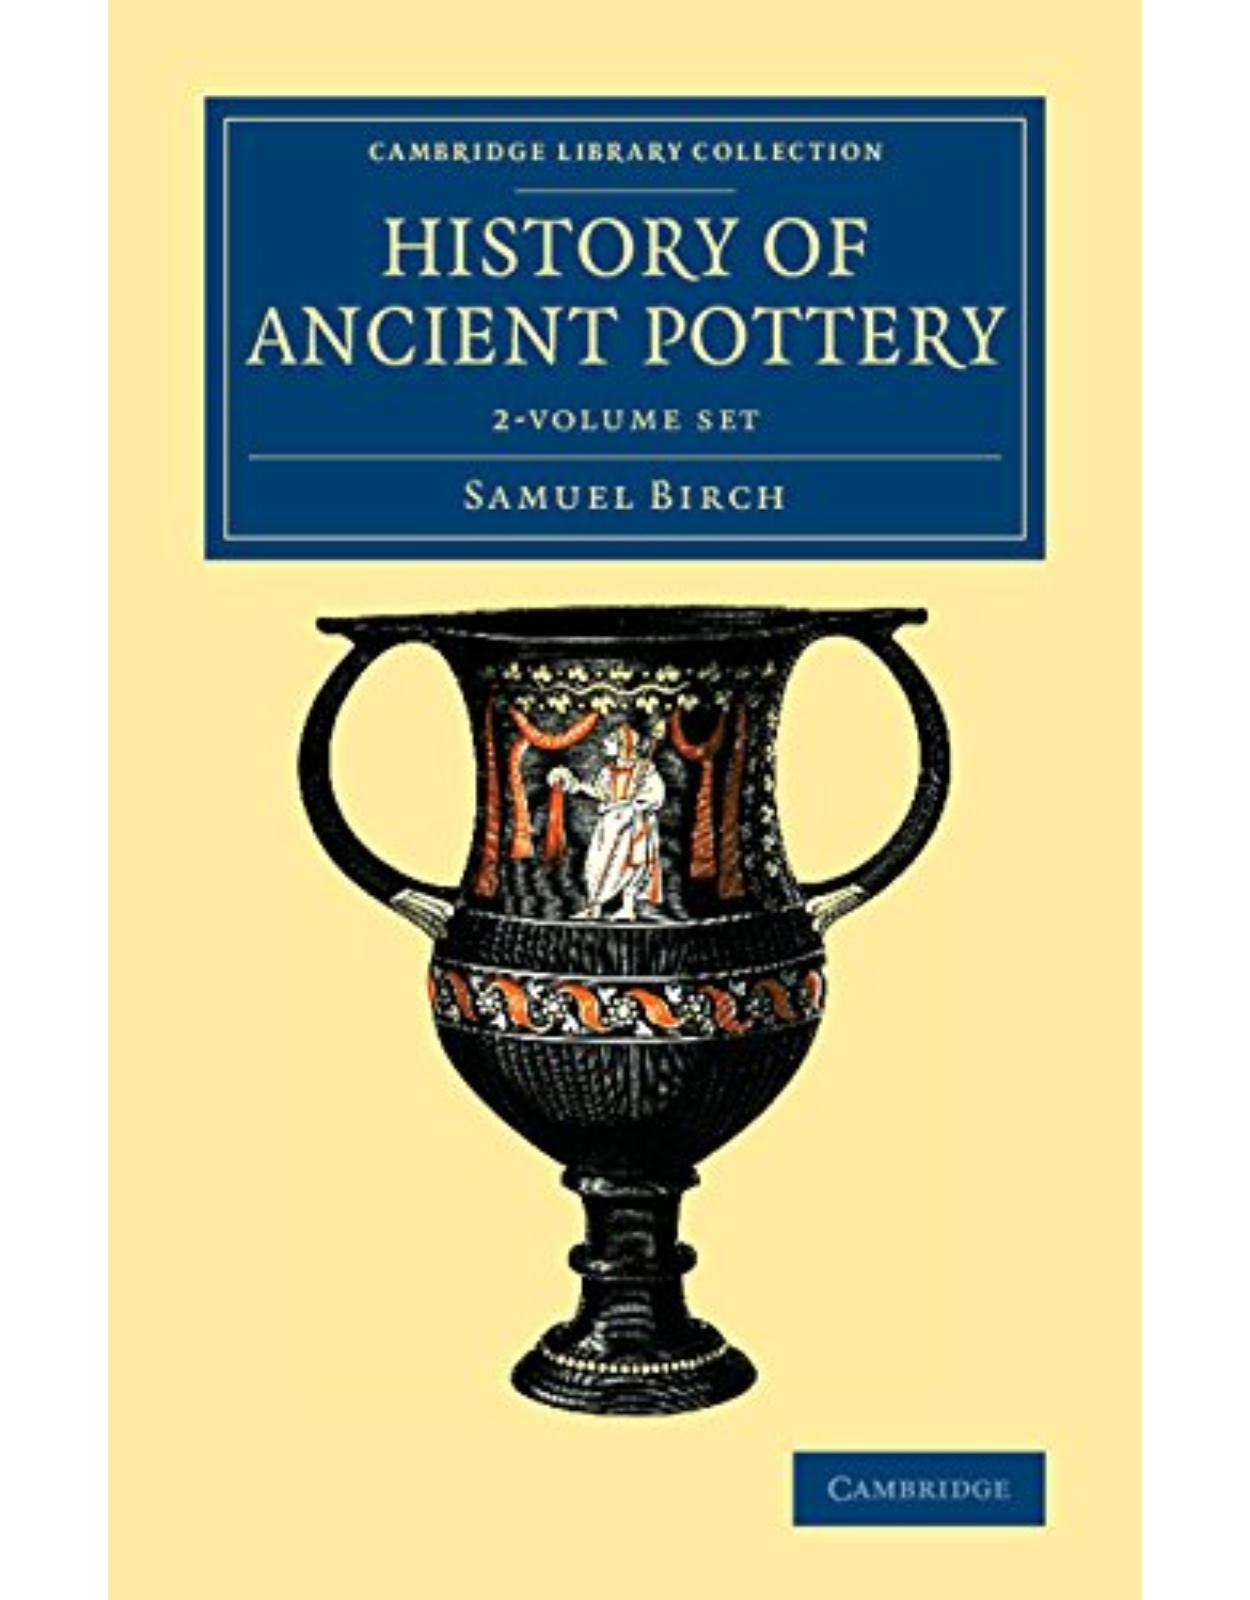 History of Ancient Pottery: Volume 2 (Cambridge Library Collection - Archaeology) 